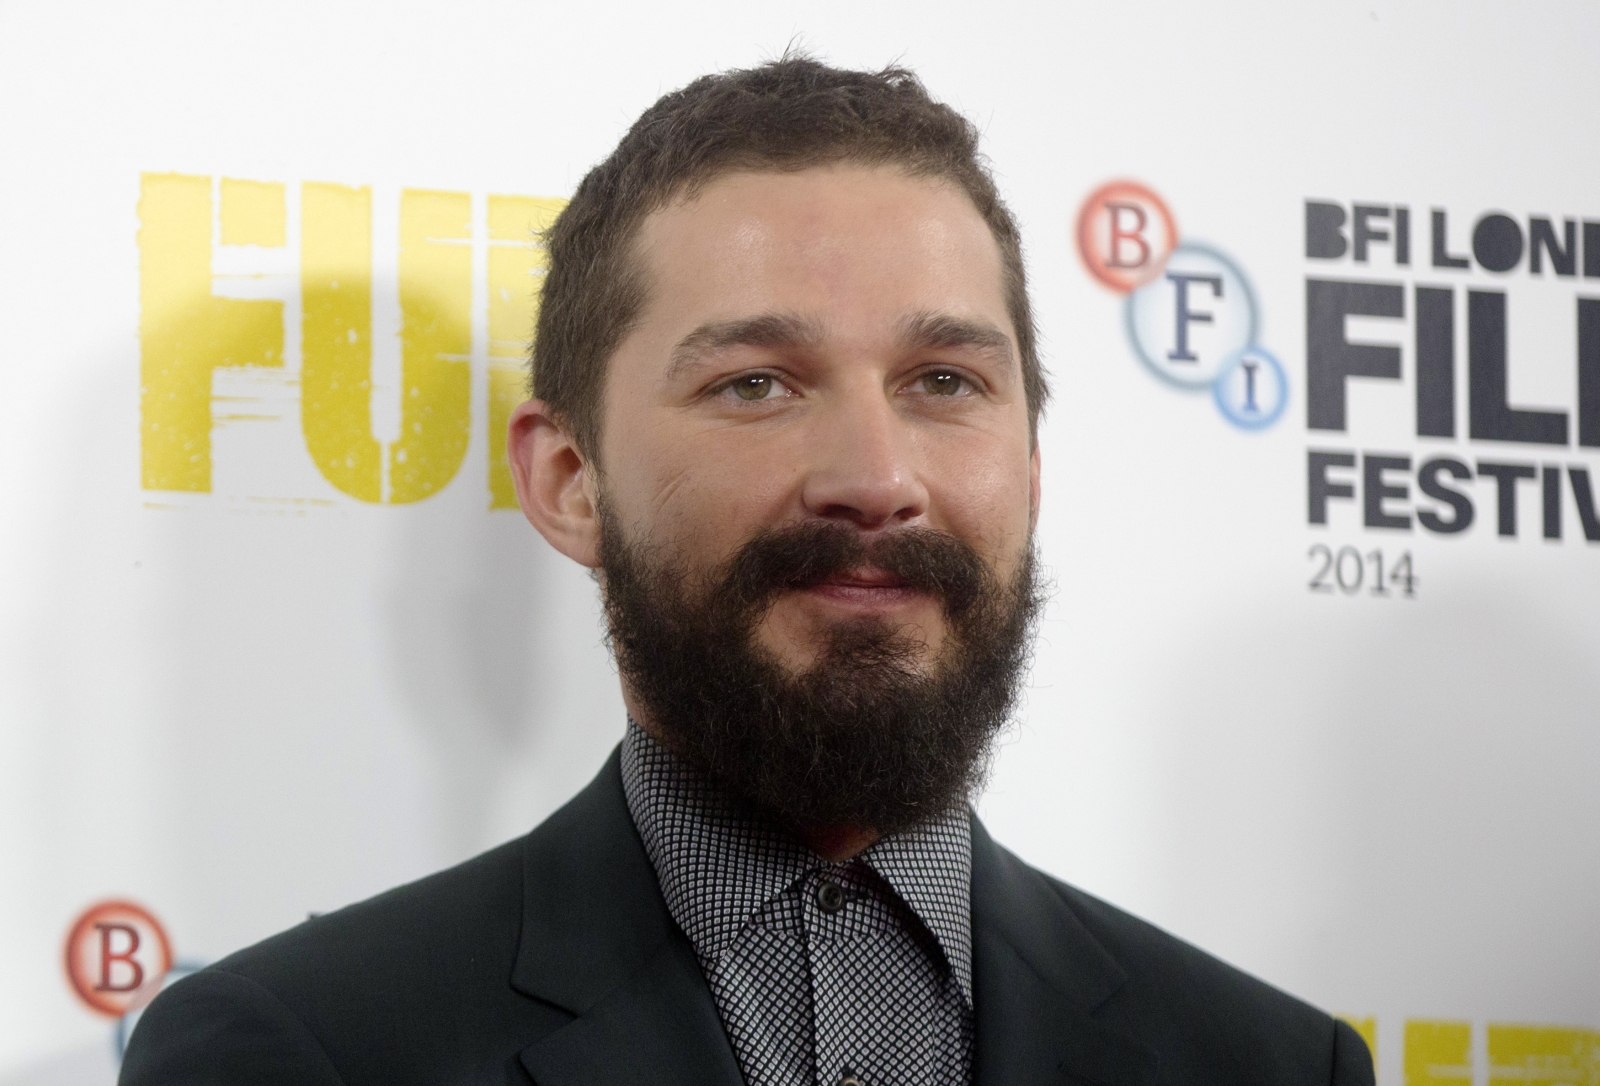 Shia LaBeouf slams Transformers movies in freestyle rap: 'I'm so past that'1600 x 1086